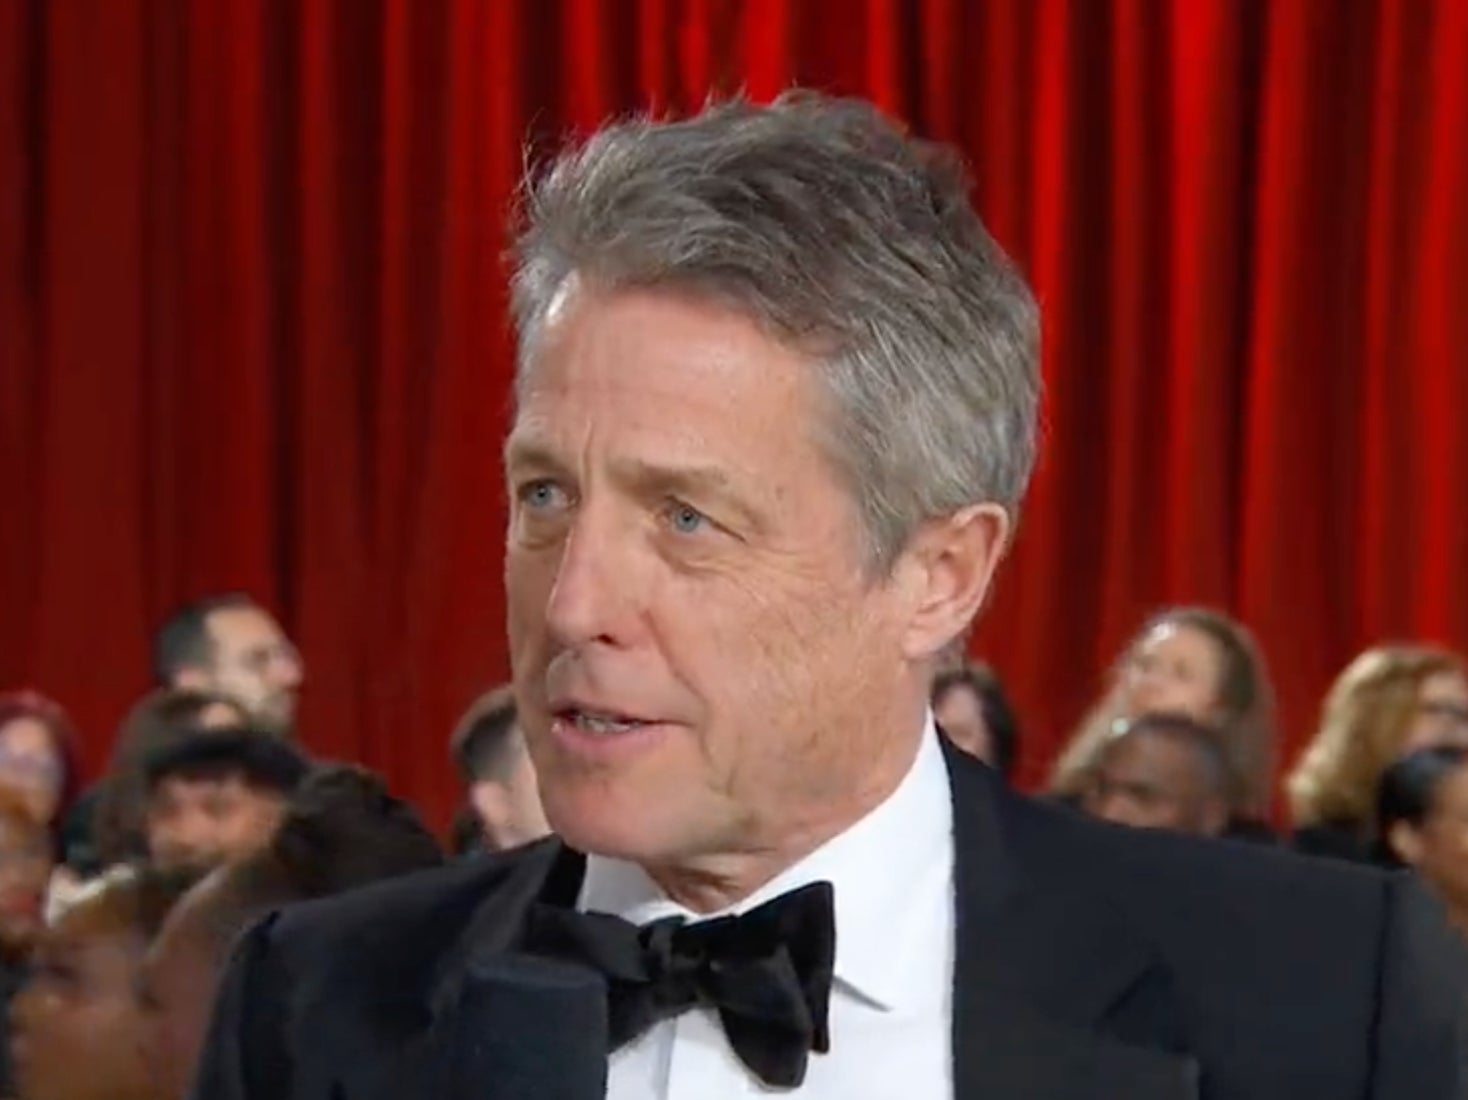 Oscars 2023 Hugh Grant divides fans with ‘painful’ red carpet